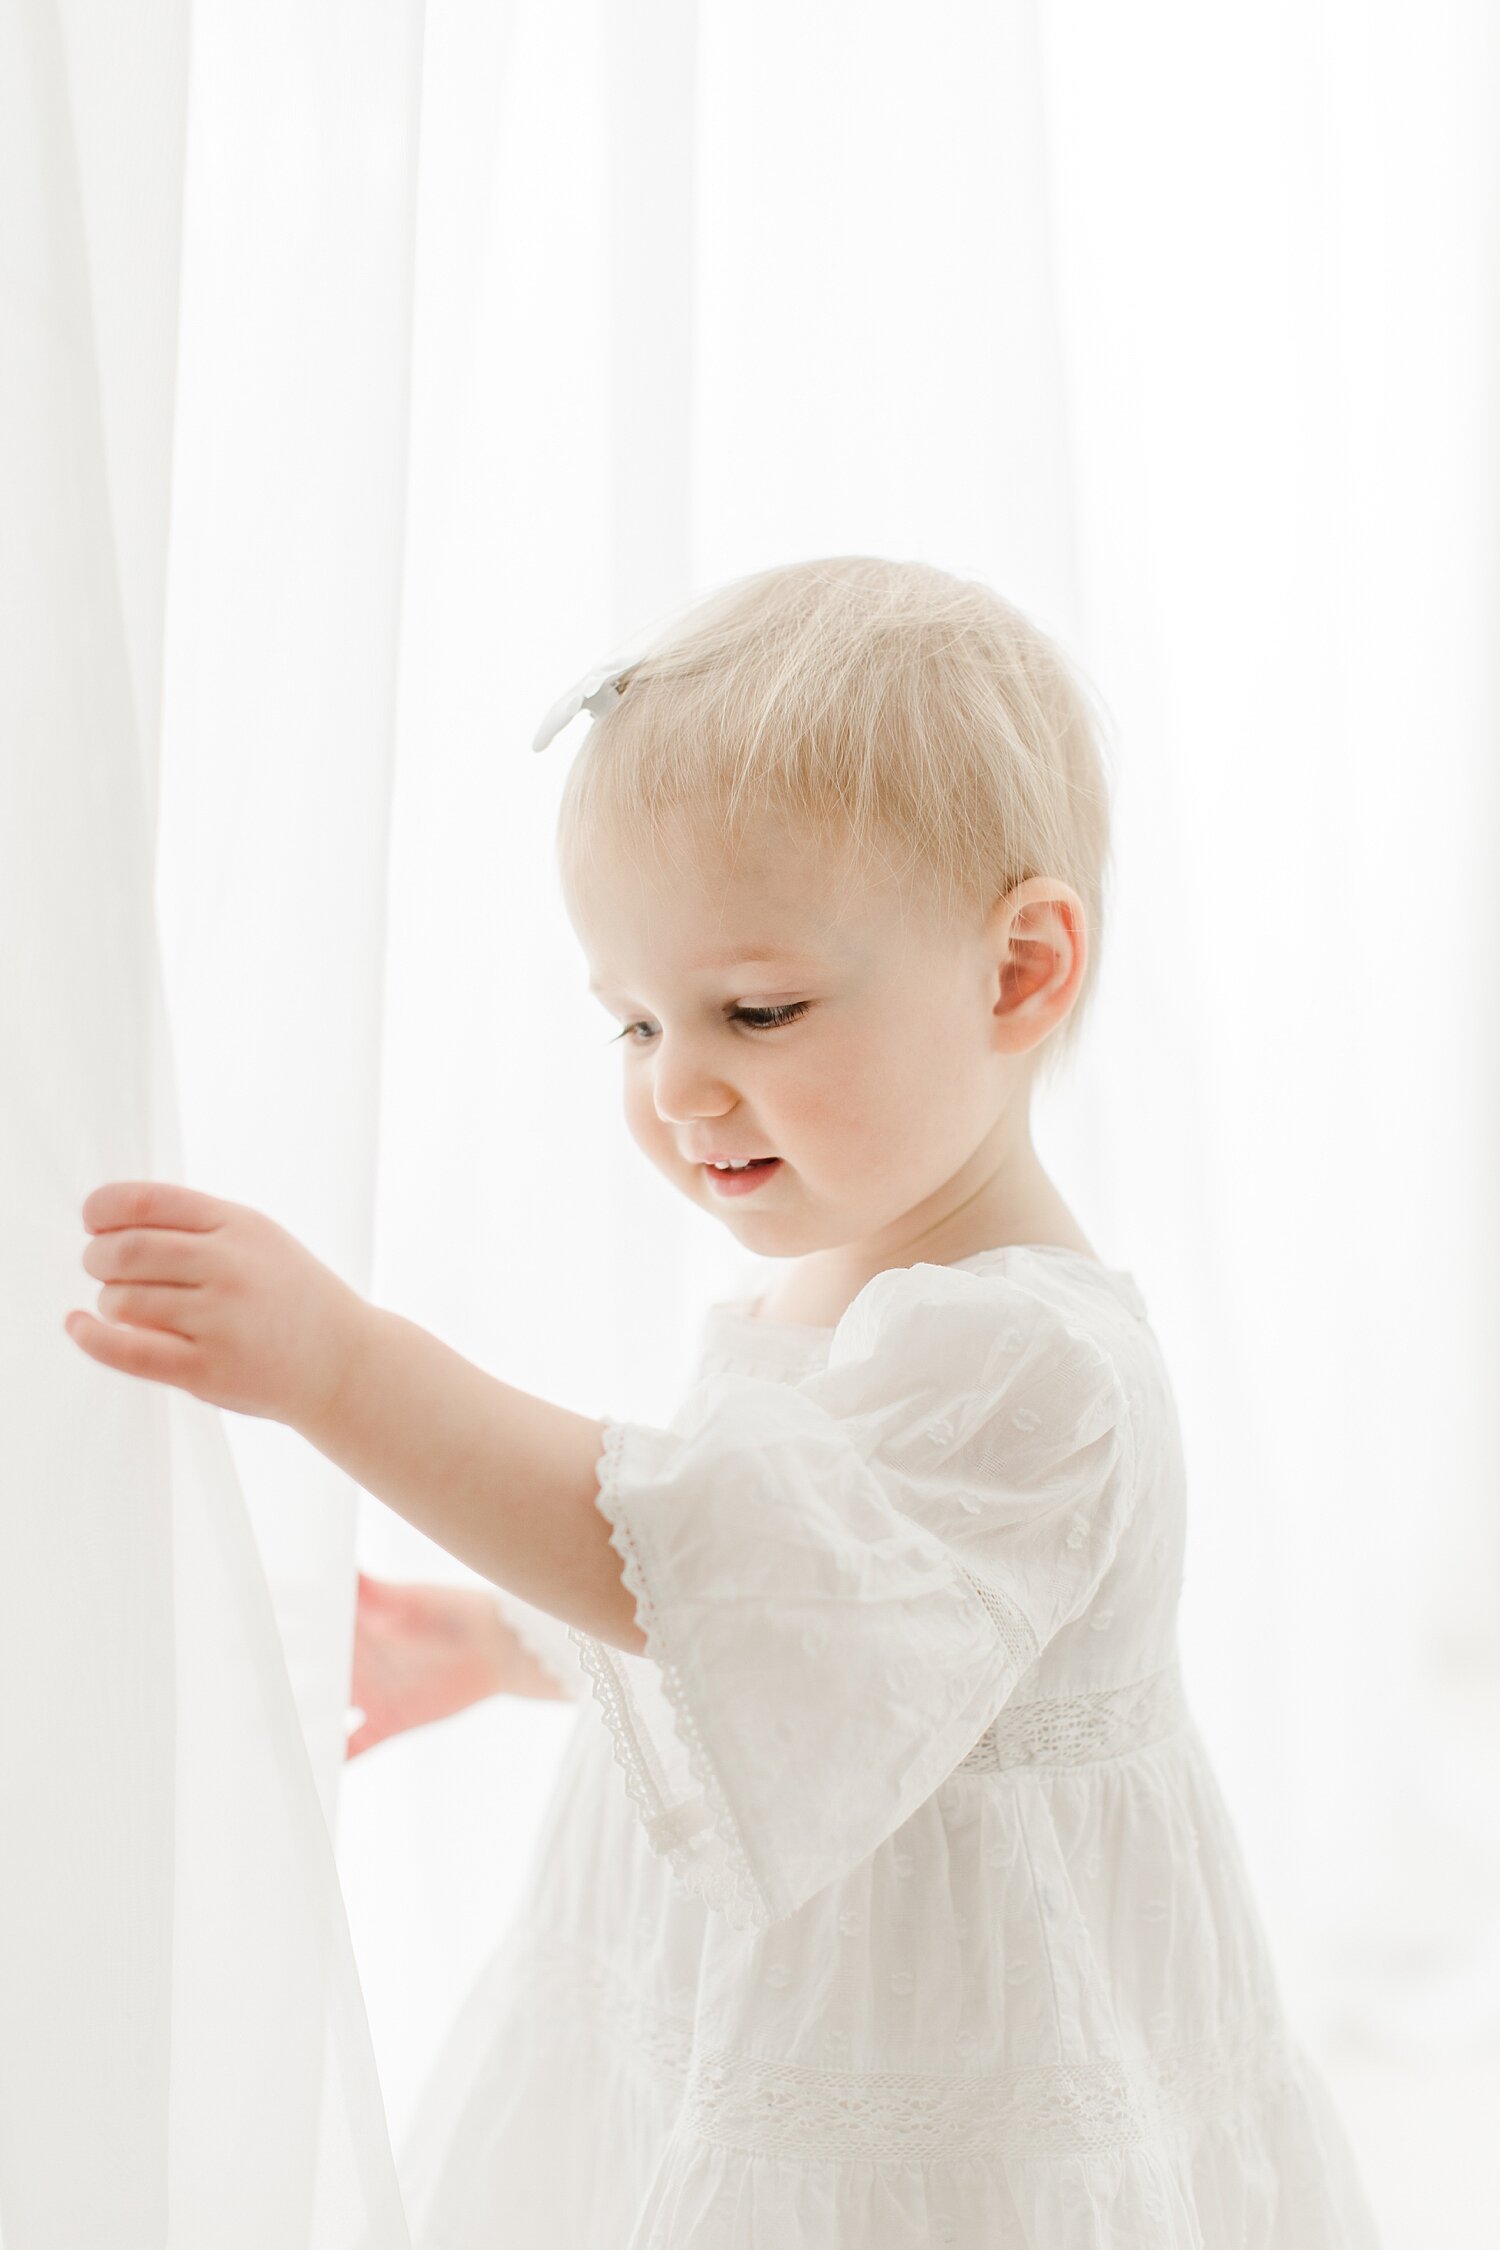 Toddler playing in sheer curtains in studio in Westport, CT. Photo by Kristin Wood Photography.